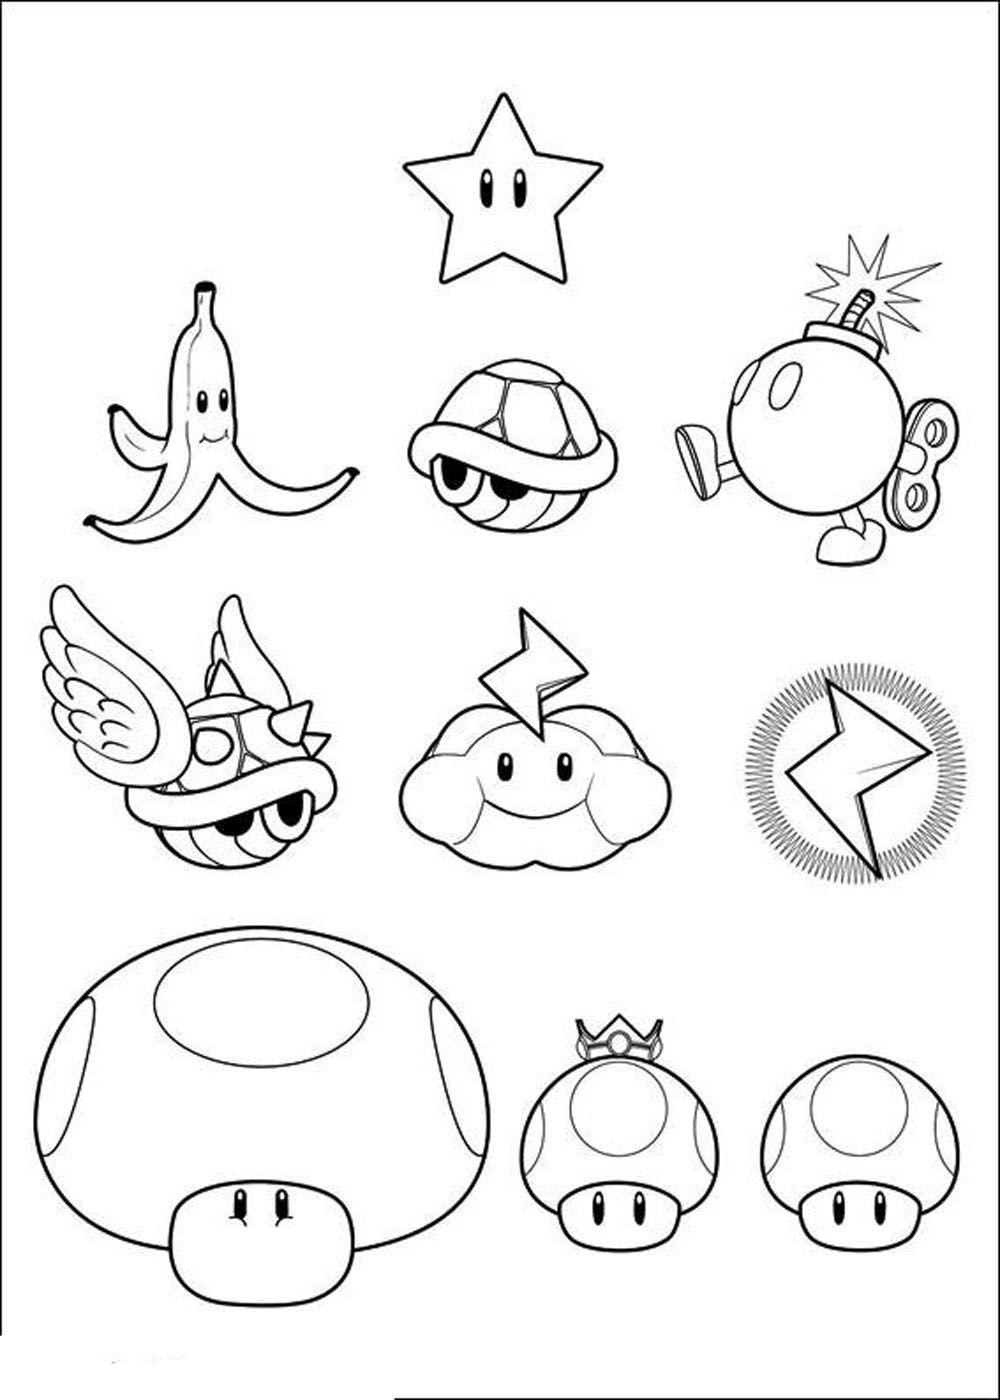 Super Mario Bros Characters Coloring Pages - Coloring Home